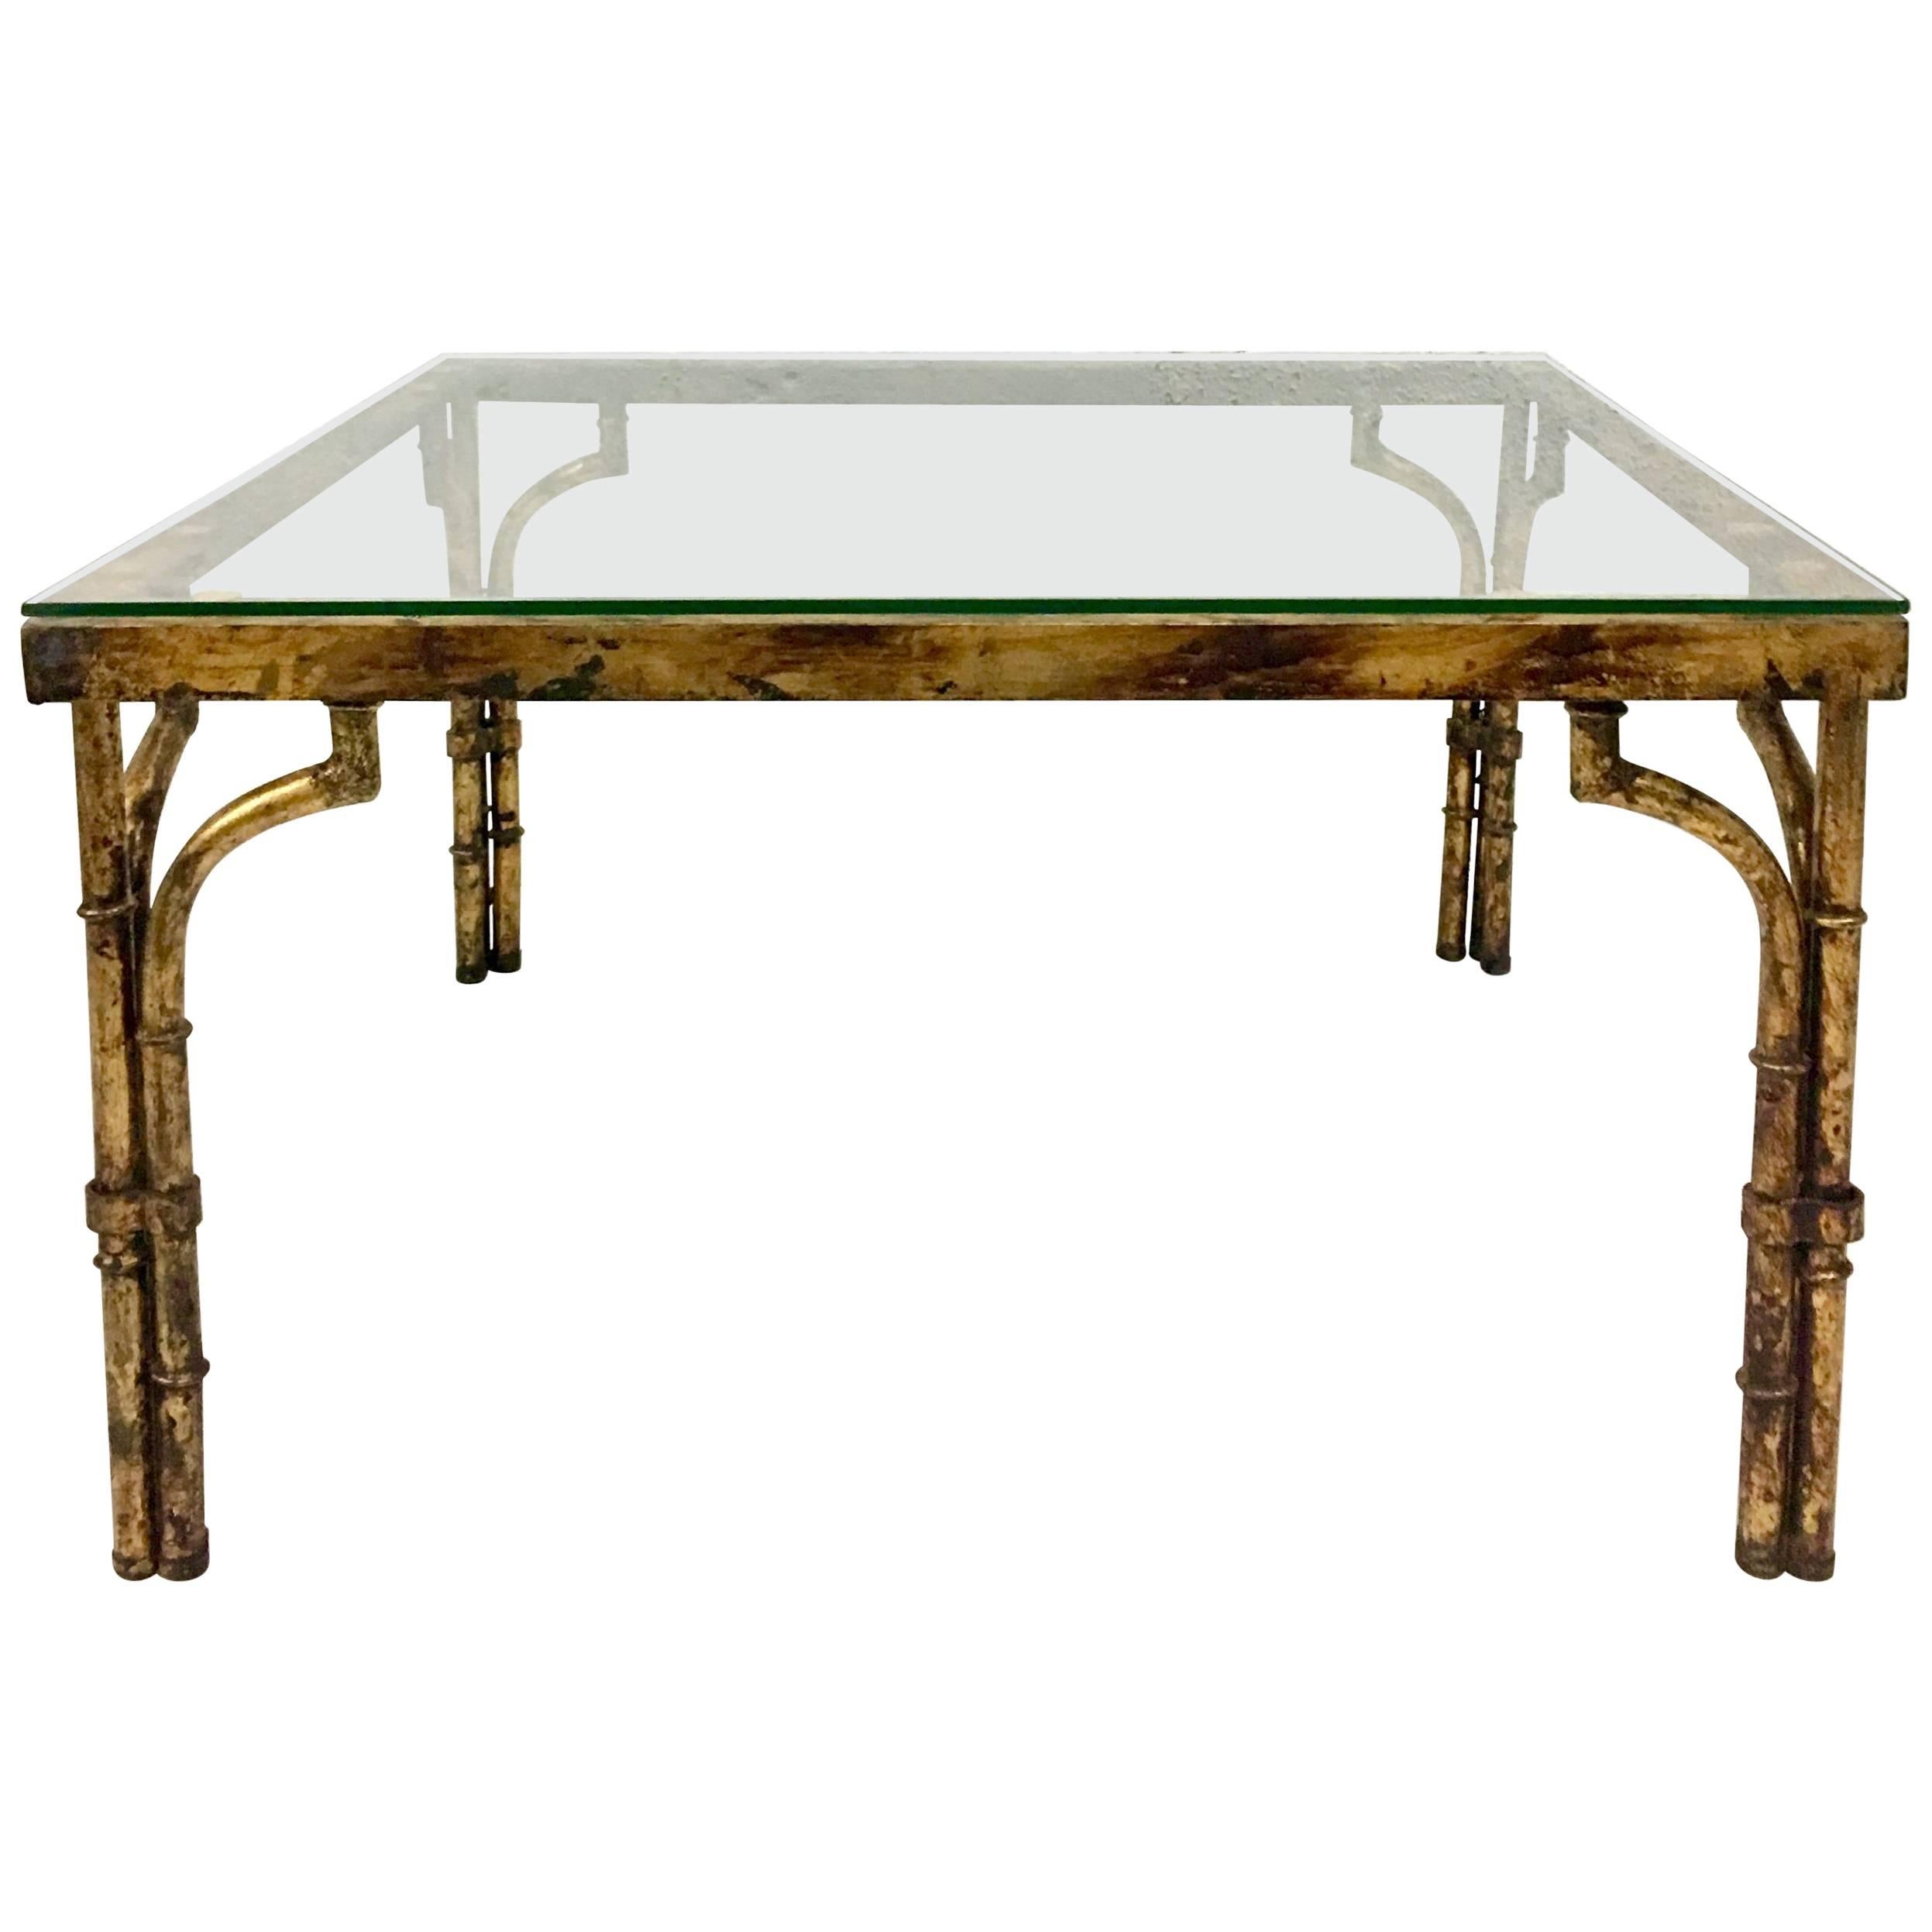 21st Century Faux Bamboo Gilt Gold Glass Top Iron Coffee Table For Sale